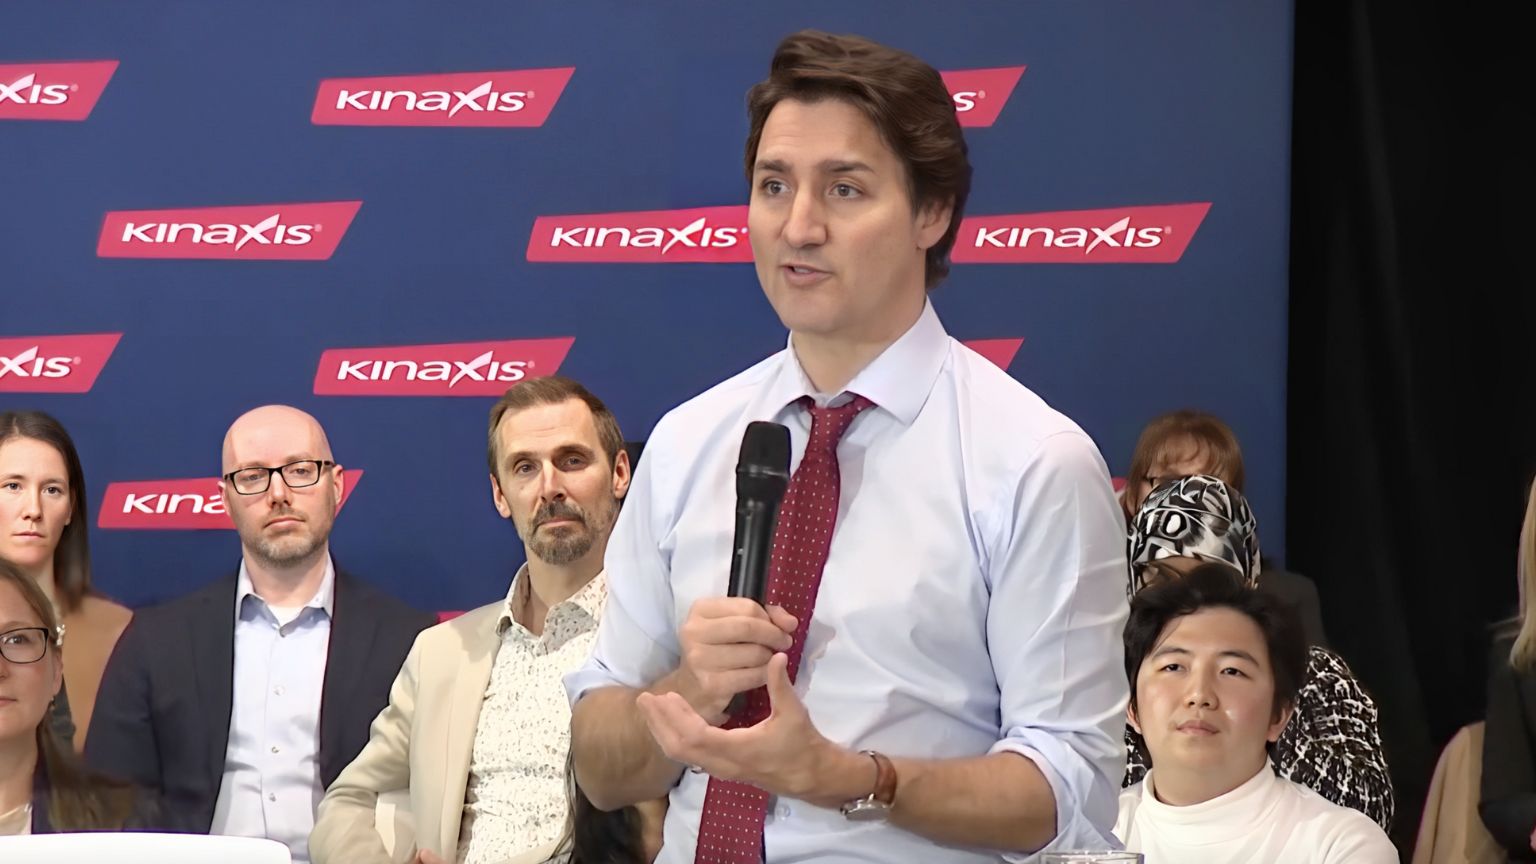 Trudeau invokes “flat-earthers” and “anti-vaxxers” as he calls for social platforms to be liable for “disinformation”